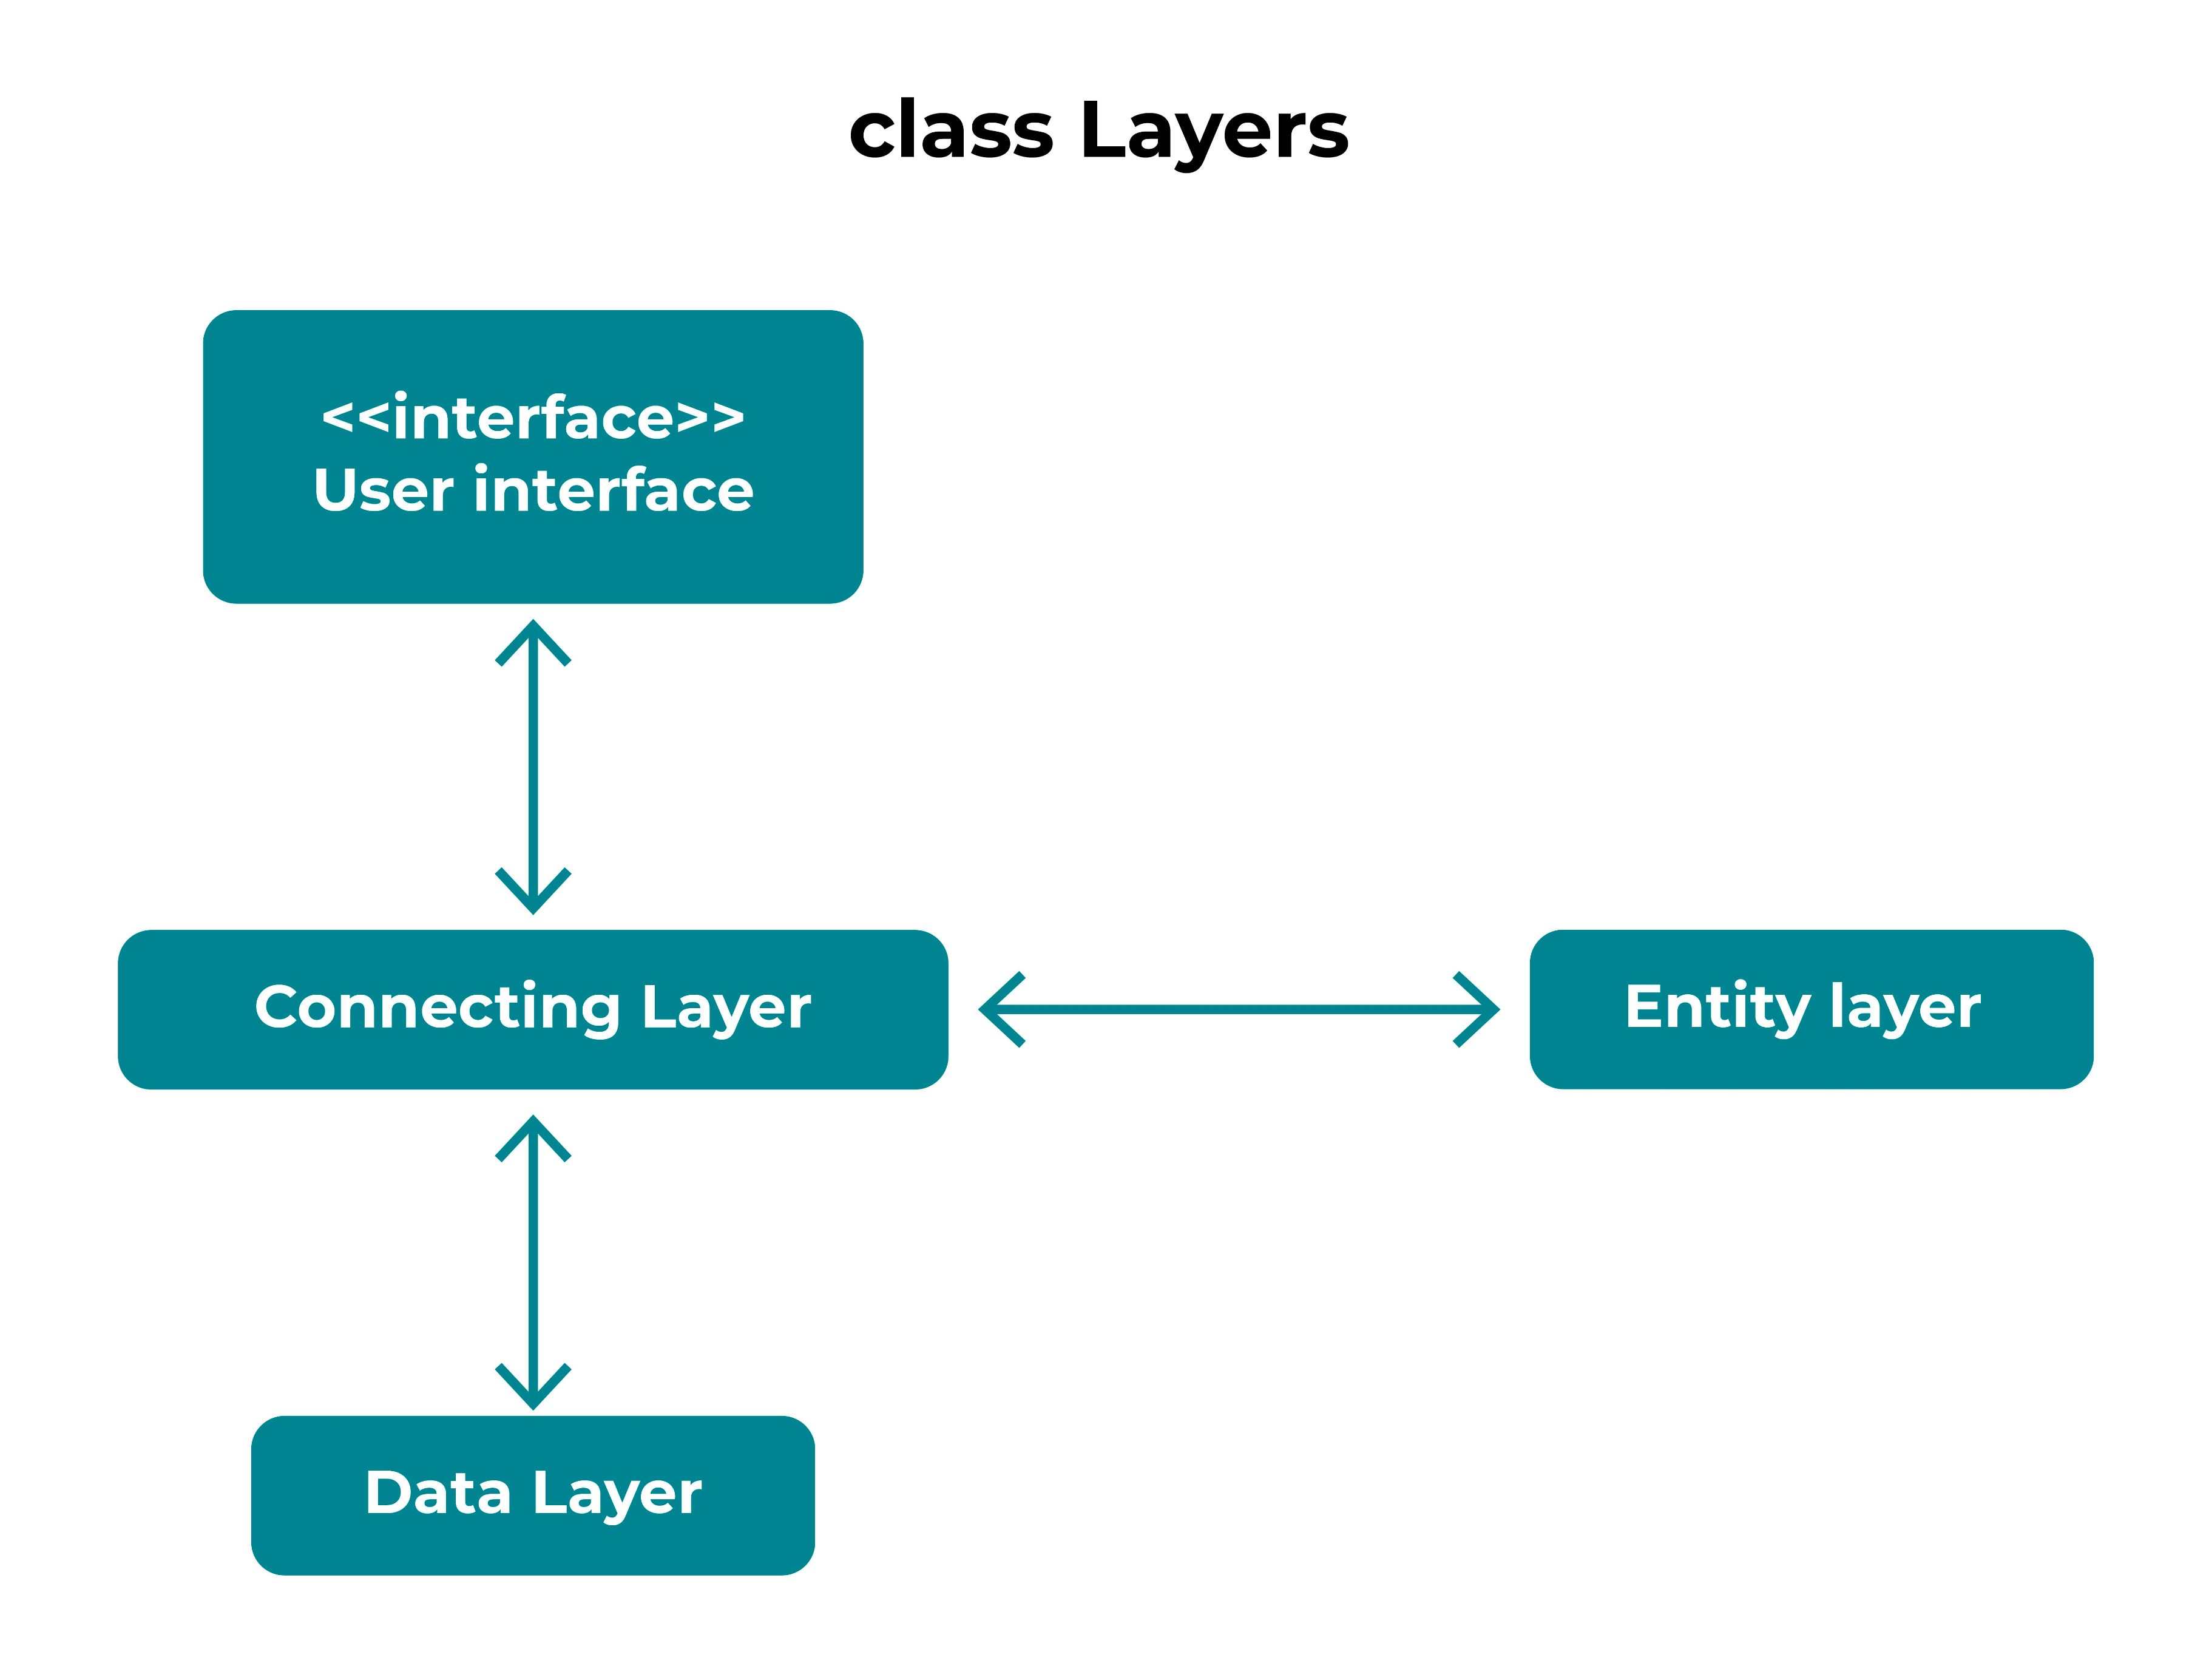 Layered architecture: <> User interface, Connecting layer, Data layer, Entity layer